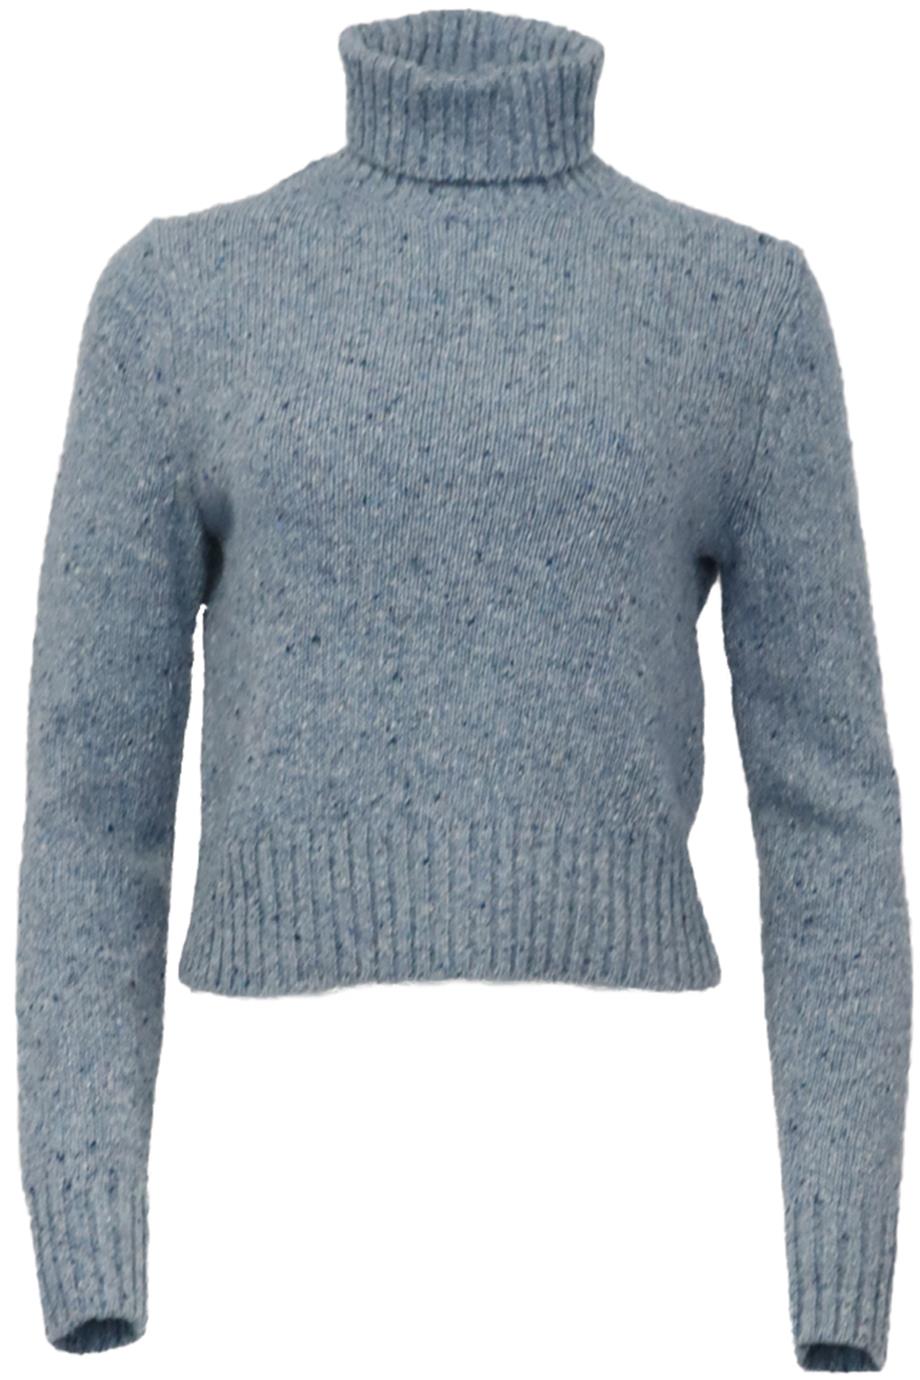 RE/DONE WOOL BLEND TURTLENECK SWEATER SMALL